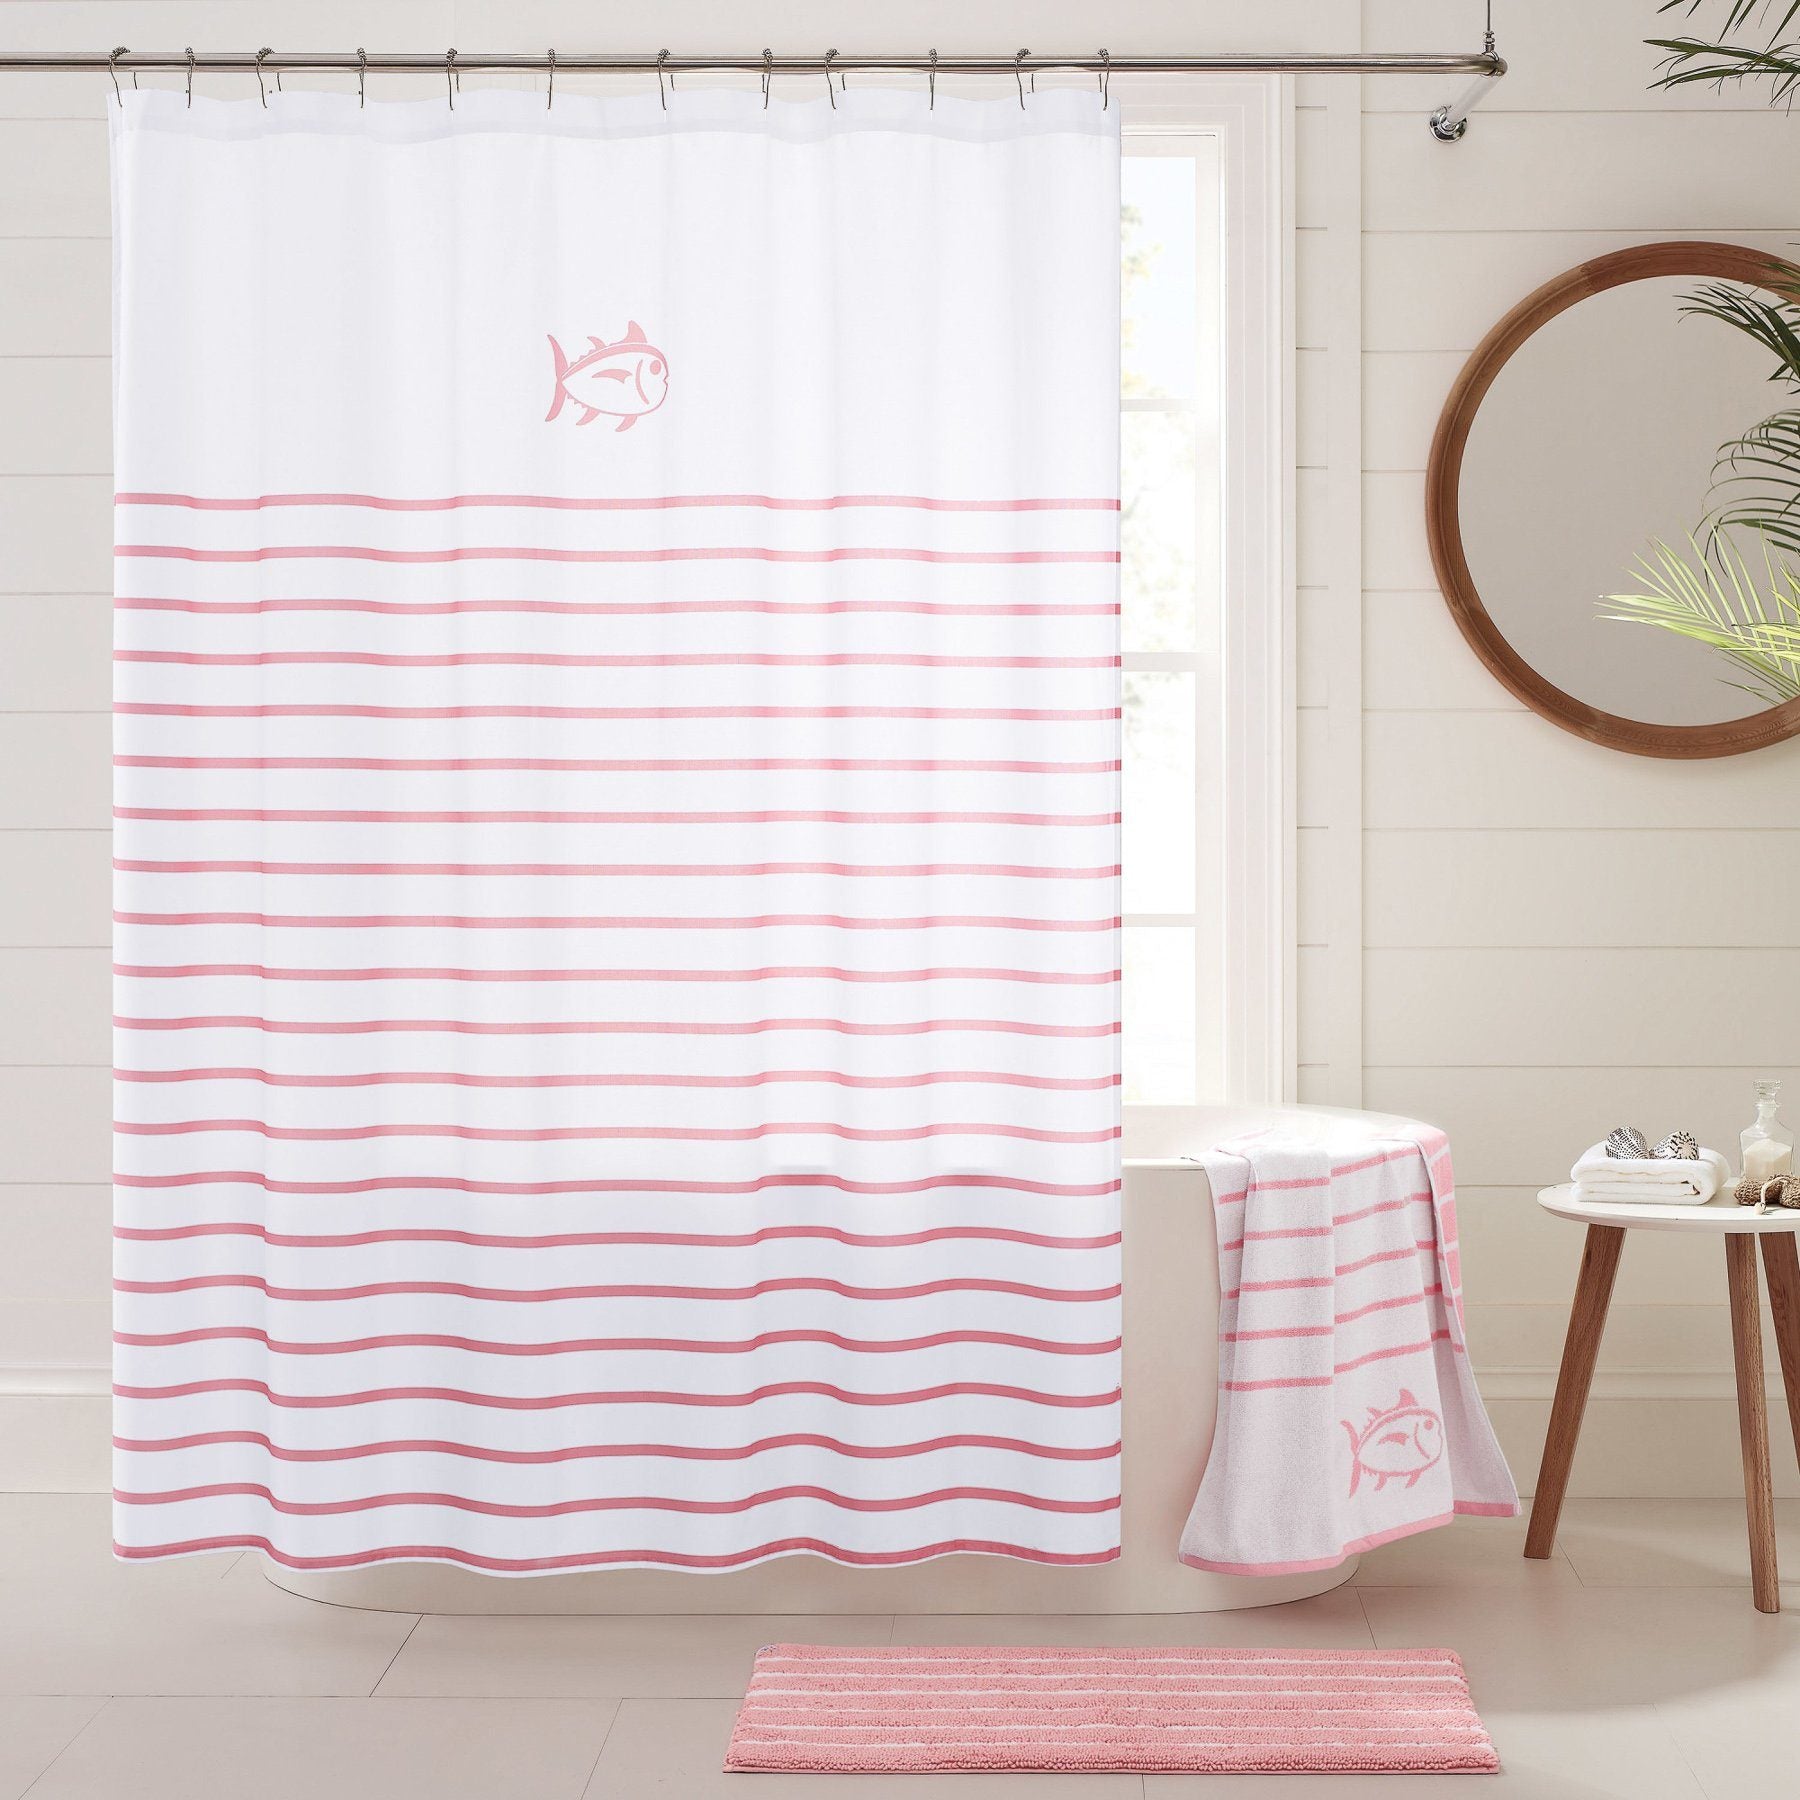 Pink Striped Shower Curtain, Hot Pink Neon Pink Cute Shower